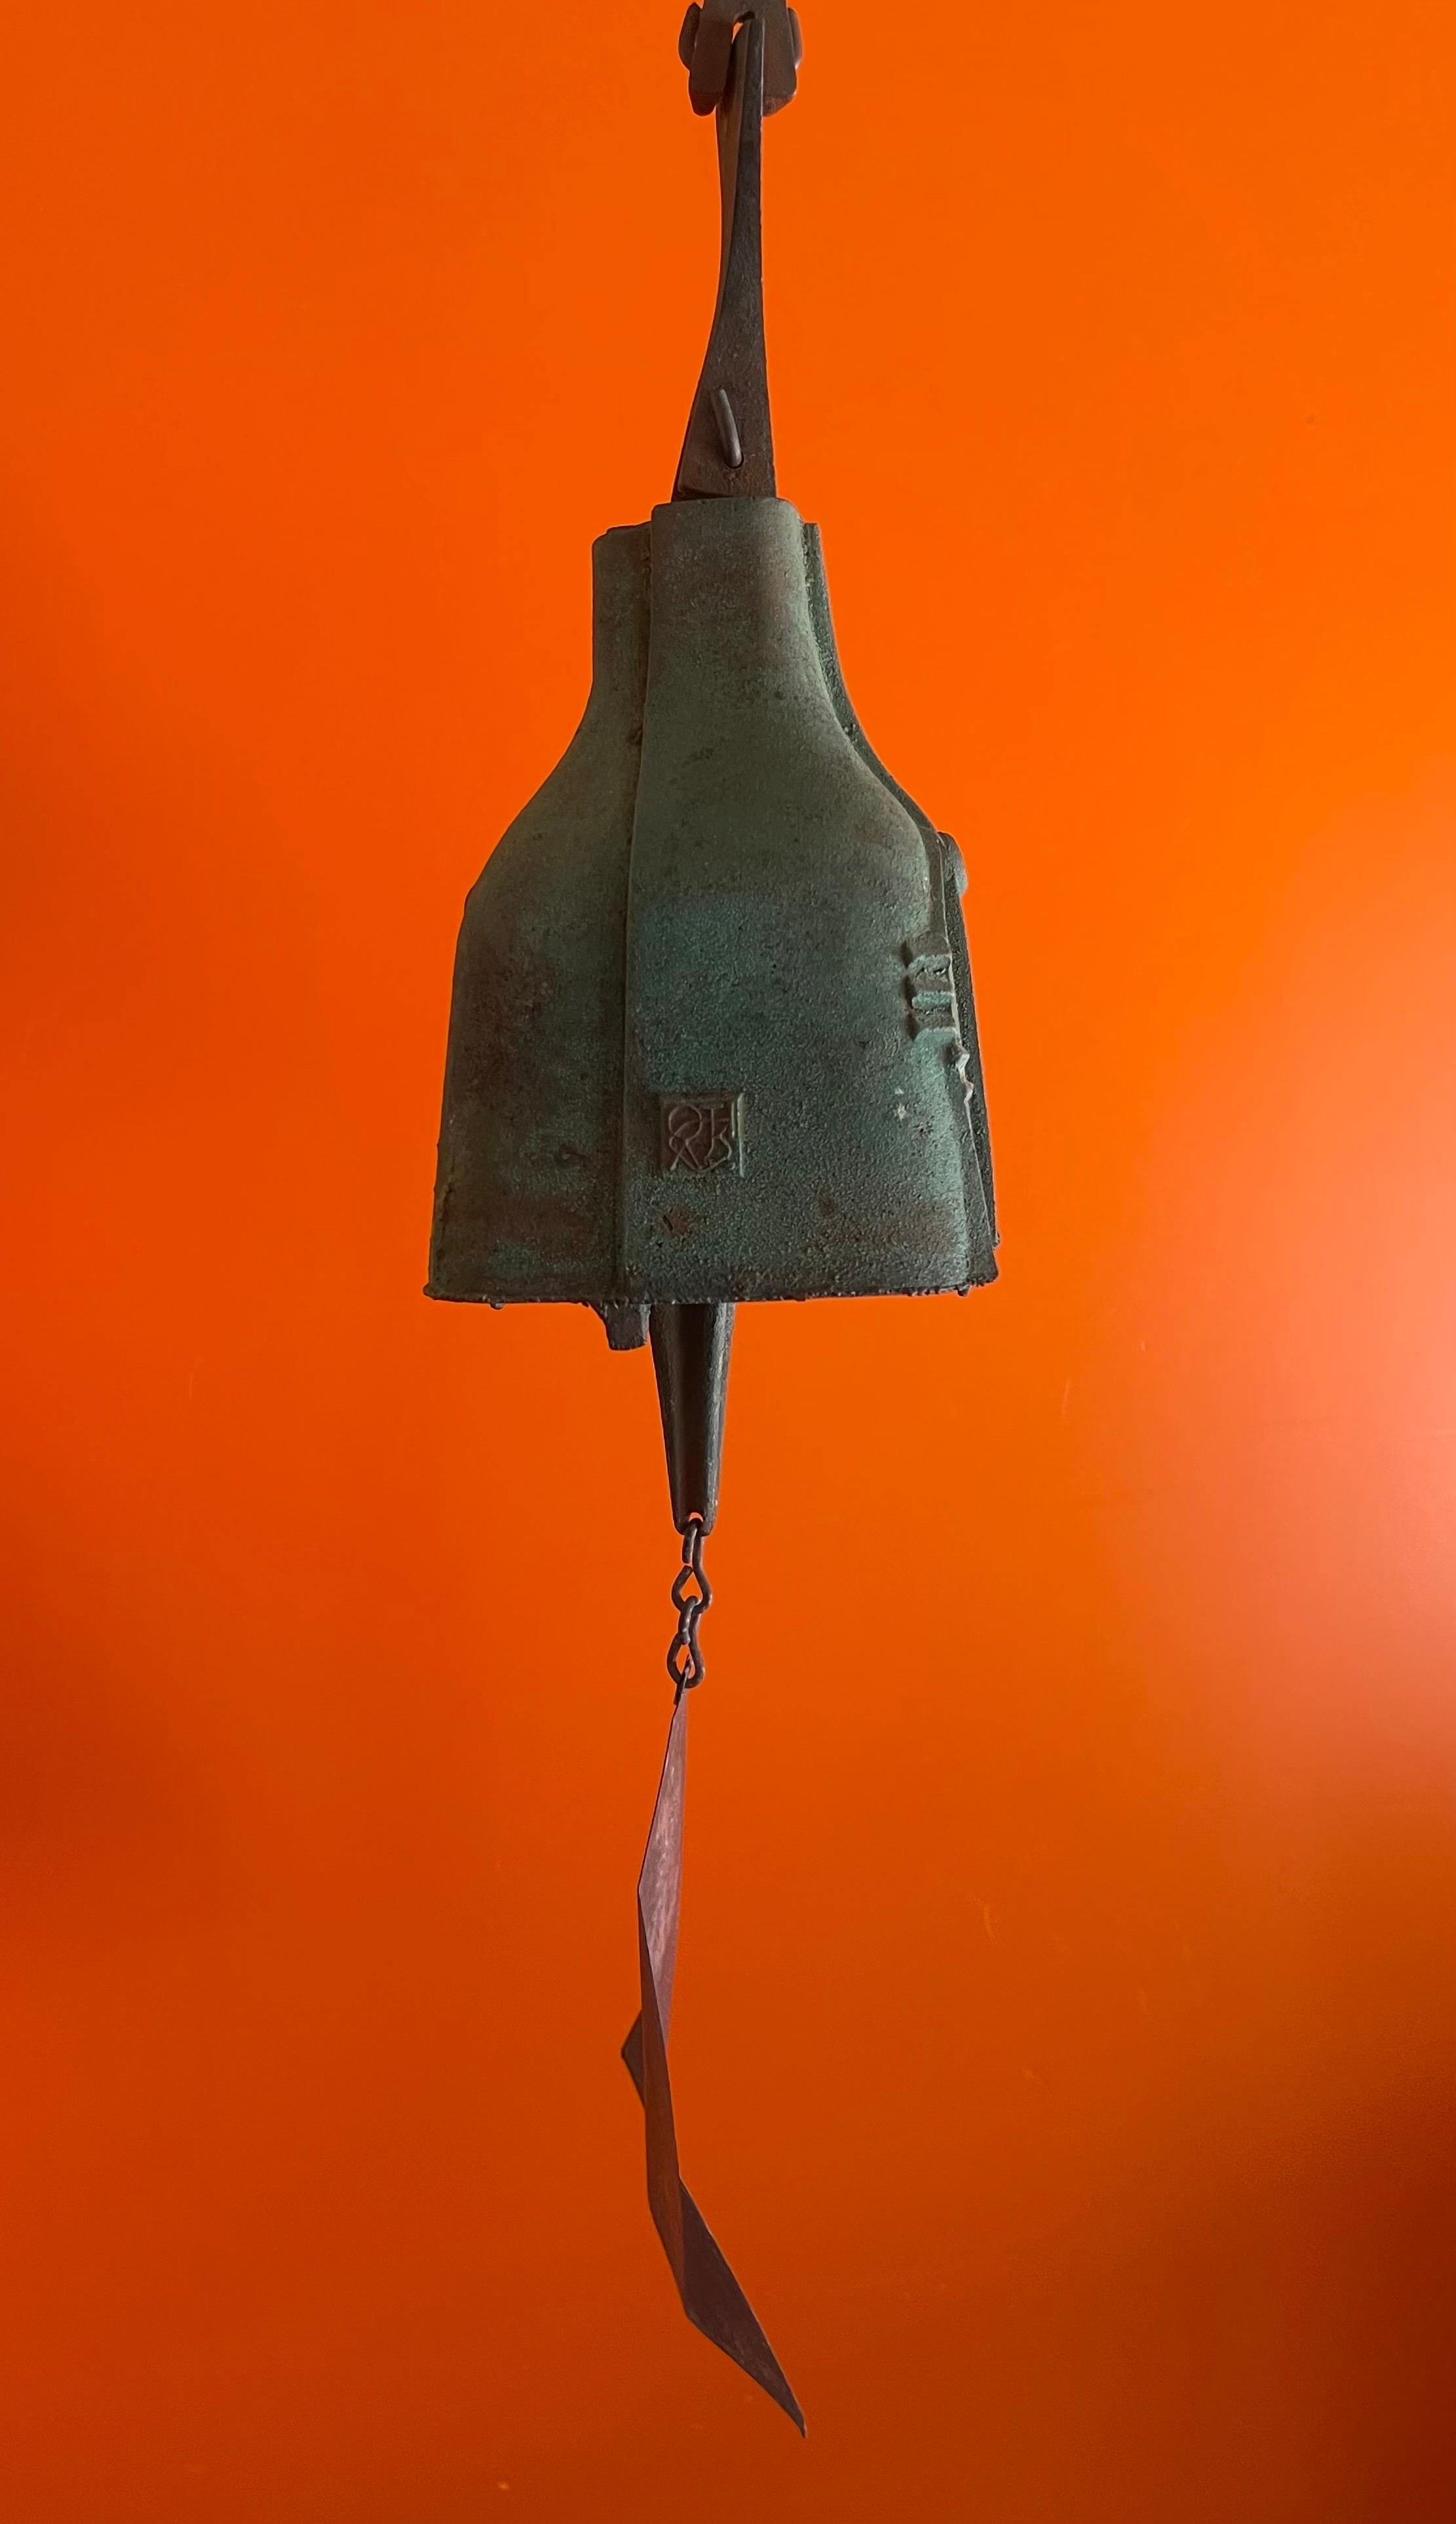 Large Bronze Wind Chime / Bell by Paolo Soleri for Cosanti 1